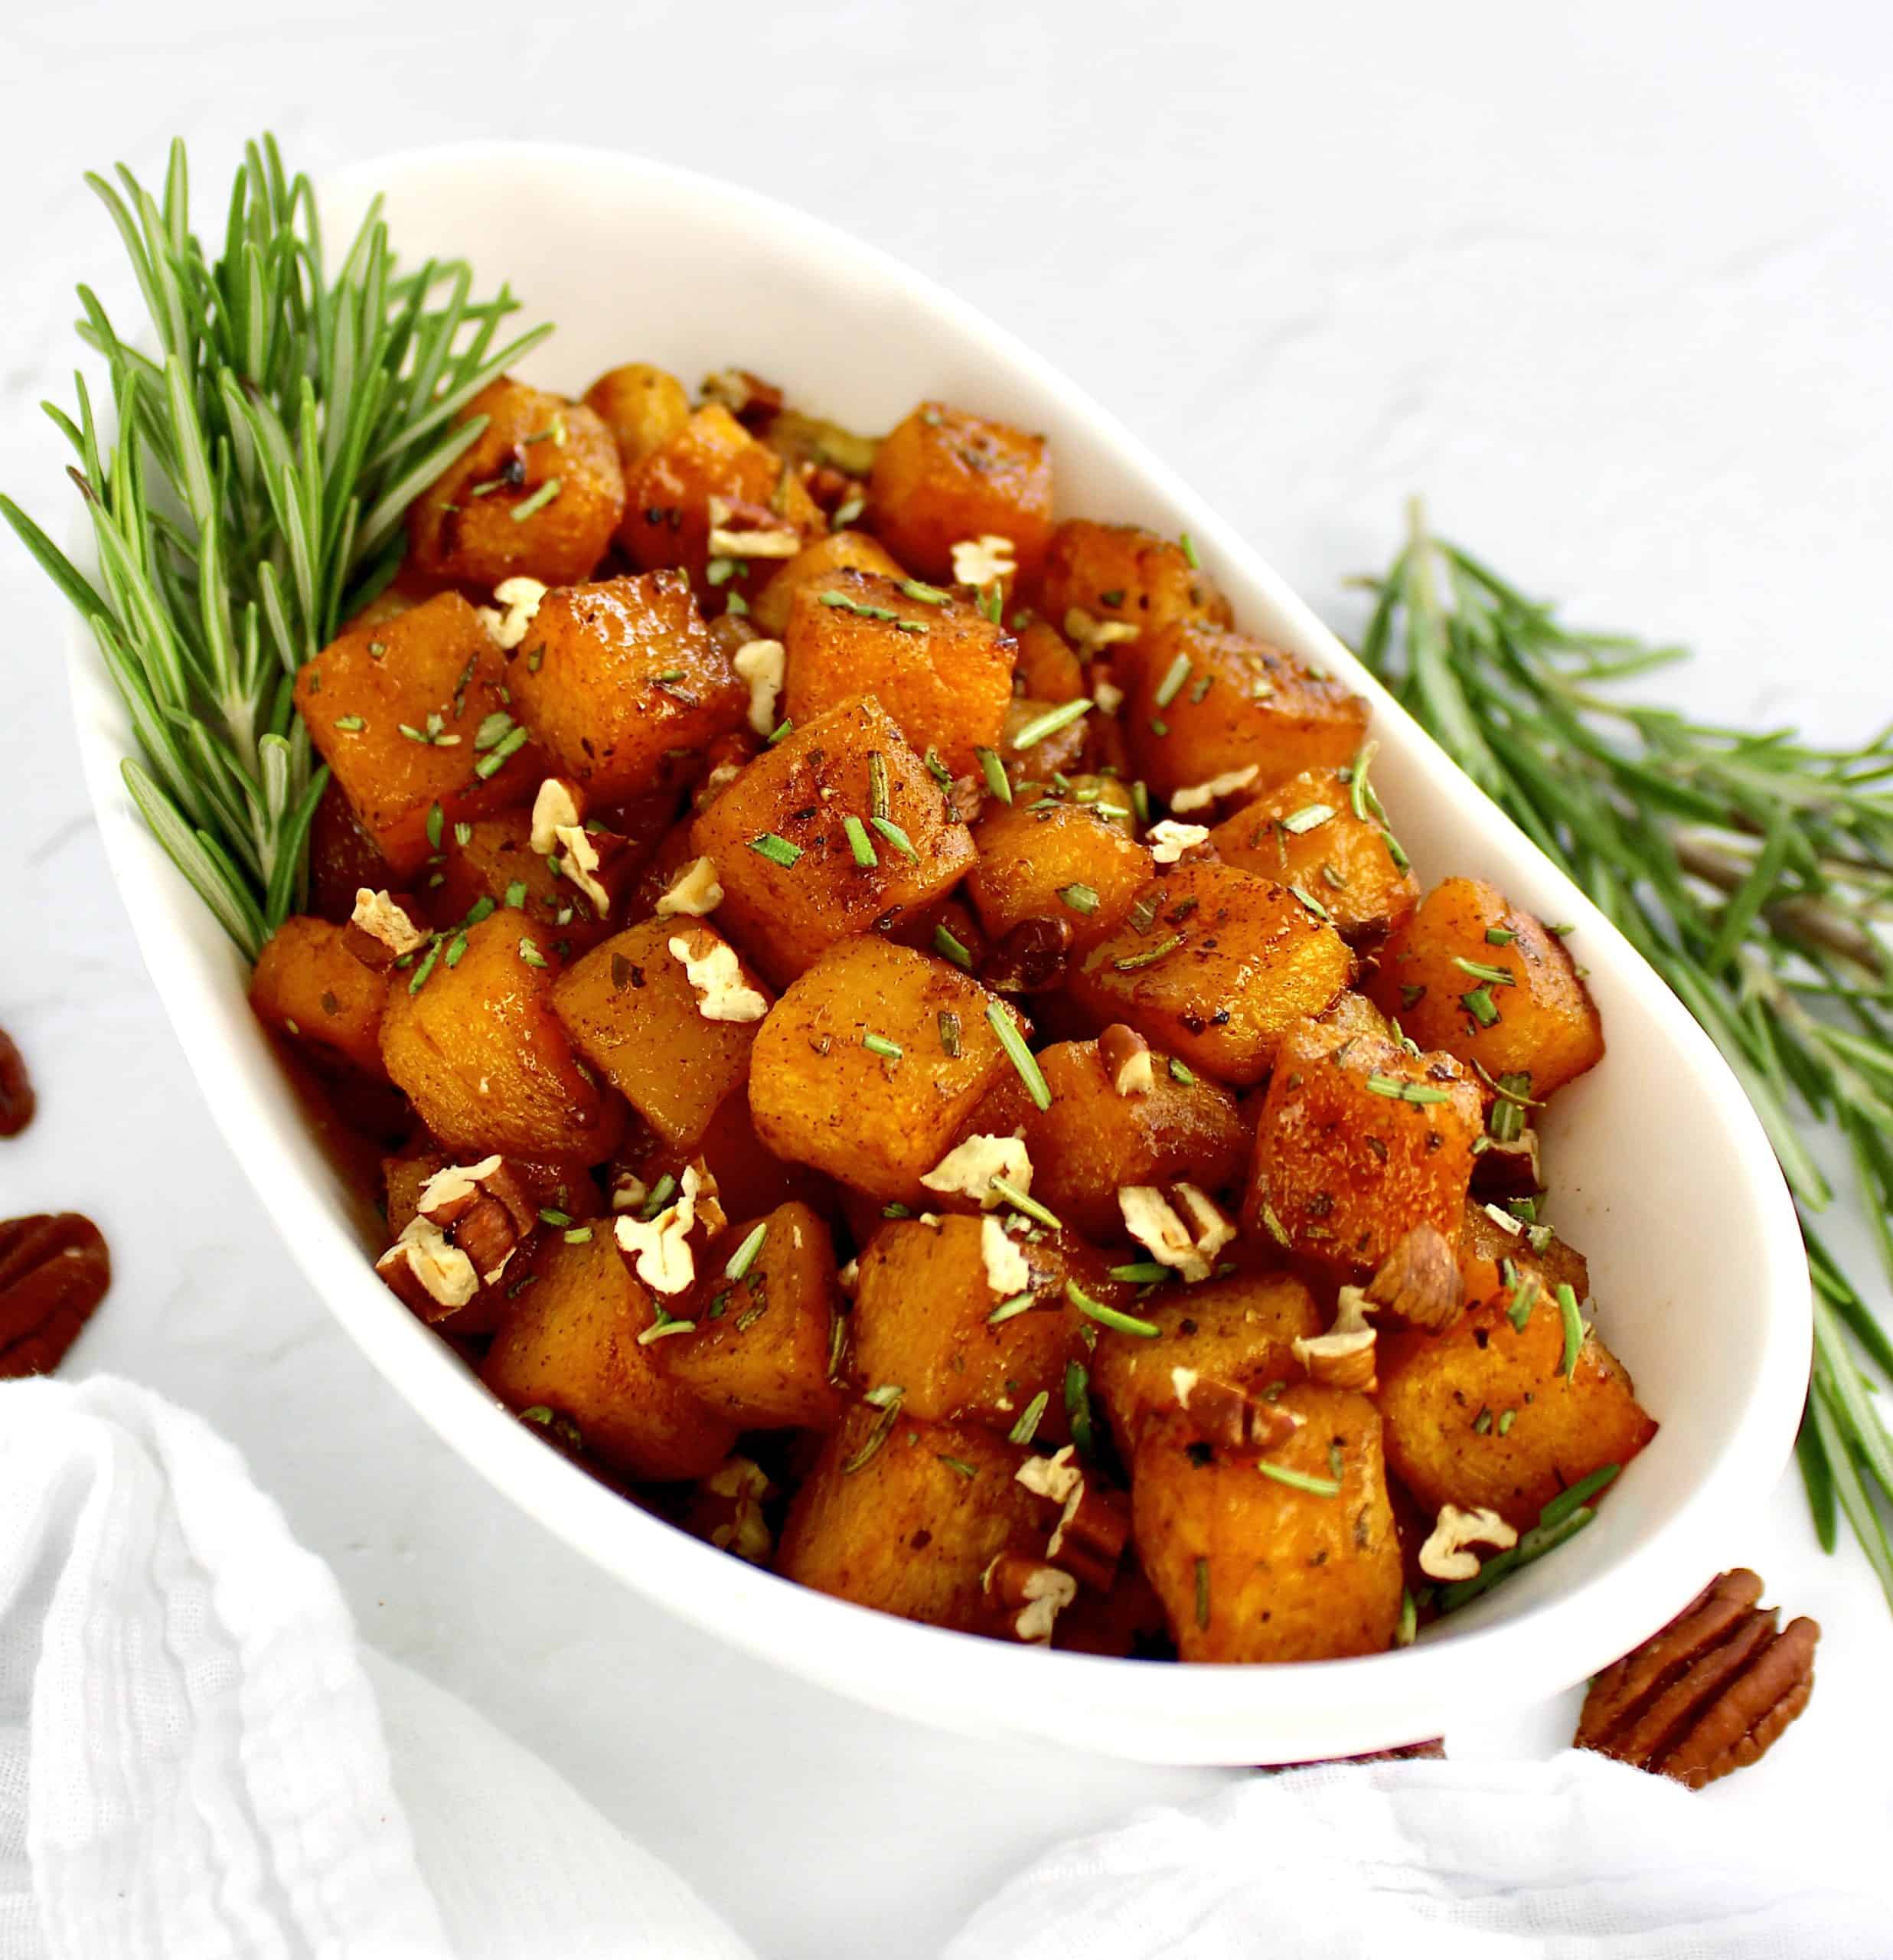 Maple Roasted Butternut Squash in white bowl with rosemary garnish